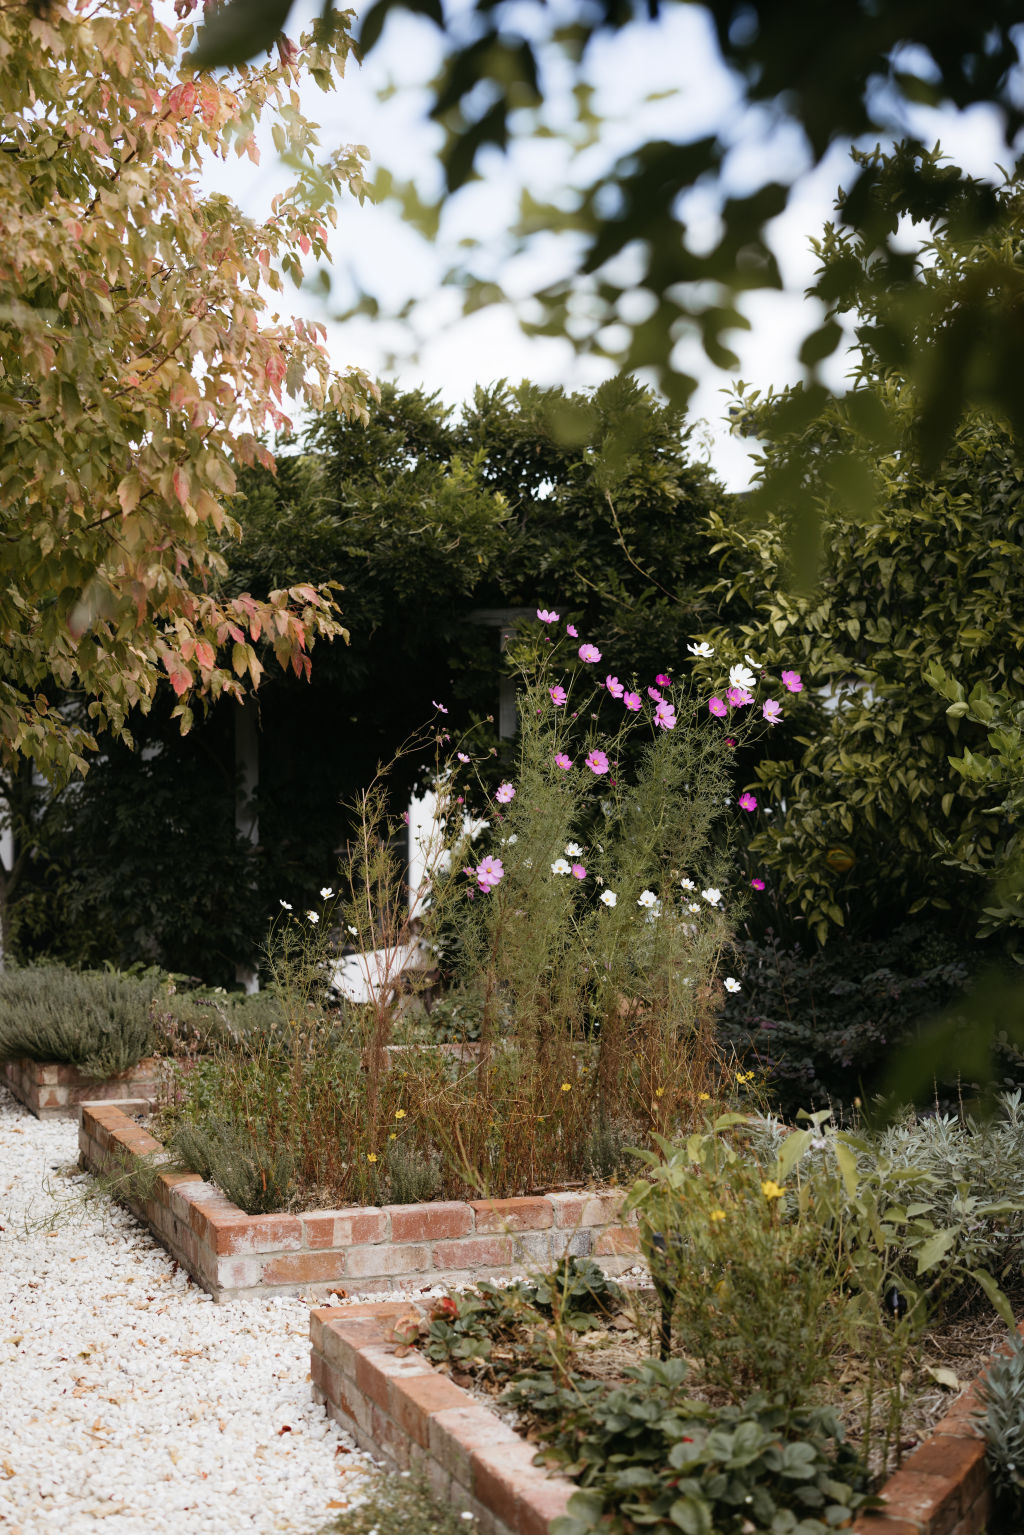 The lush garden brings Yeow happiness and serenity. Photo: Dan Evans